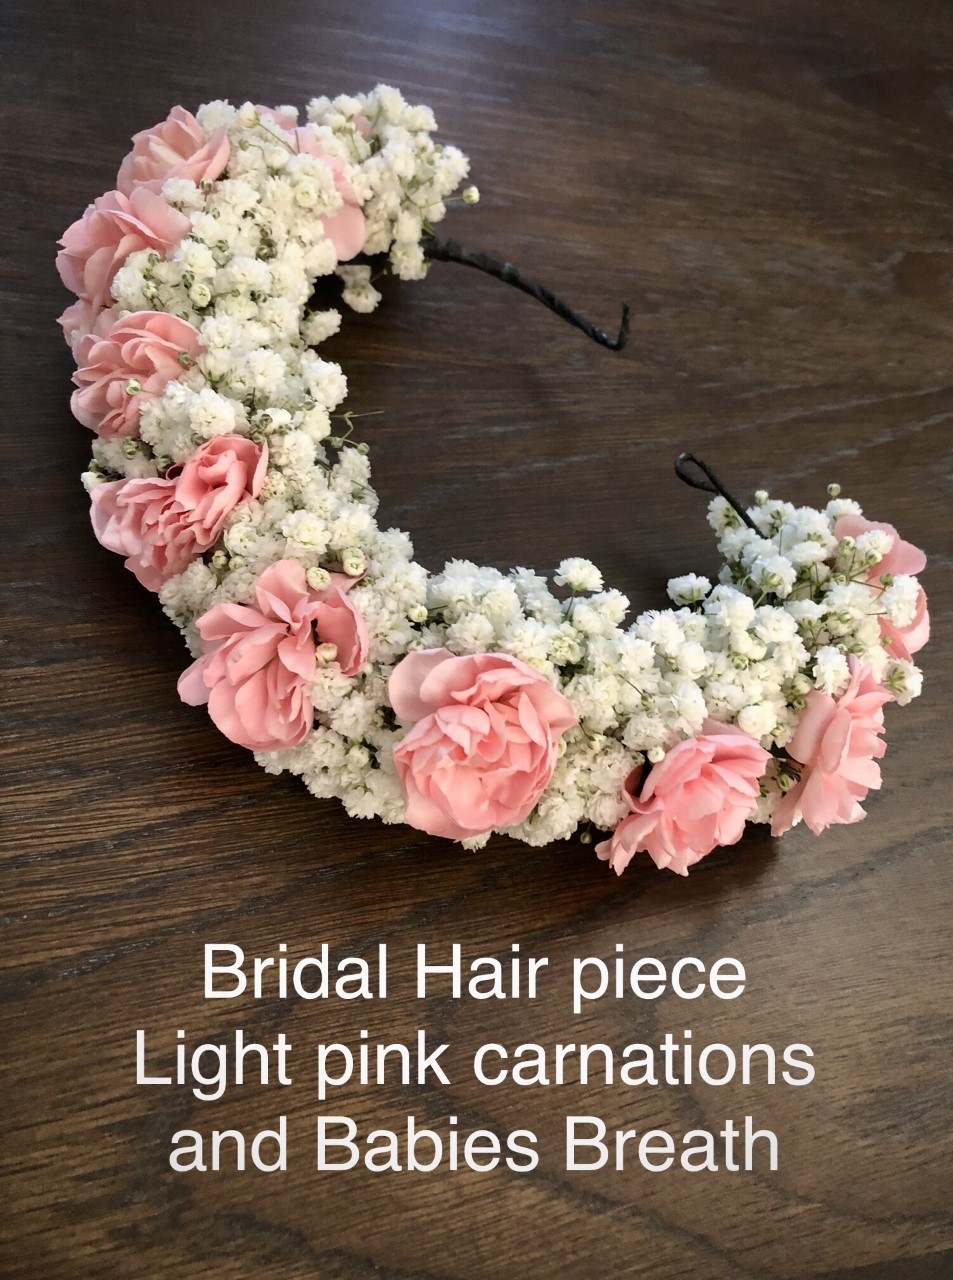 $55  Bridal Hair piece carnations and babies breath                        